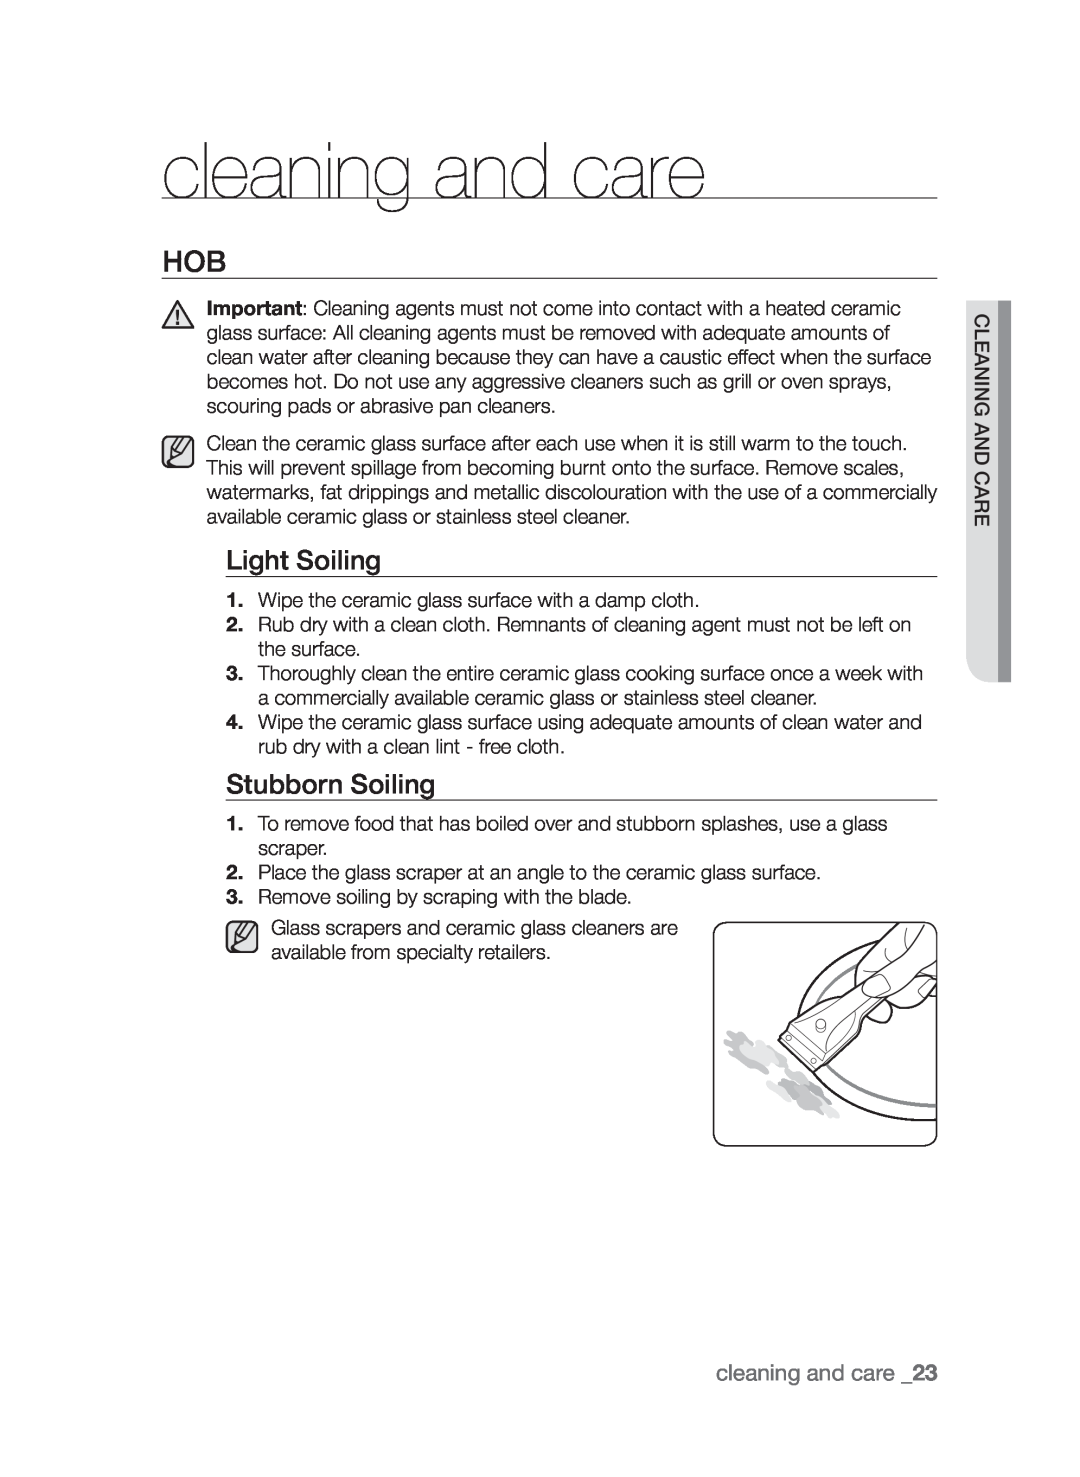 Samsung CTI613GI user manual cleaning and care, Light Soiling, Stubborn Soiling 